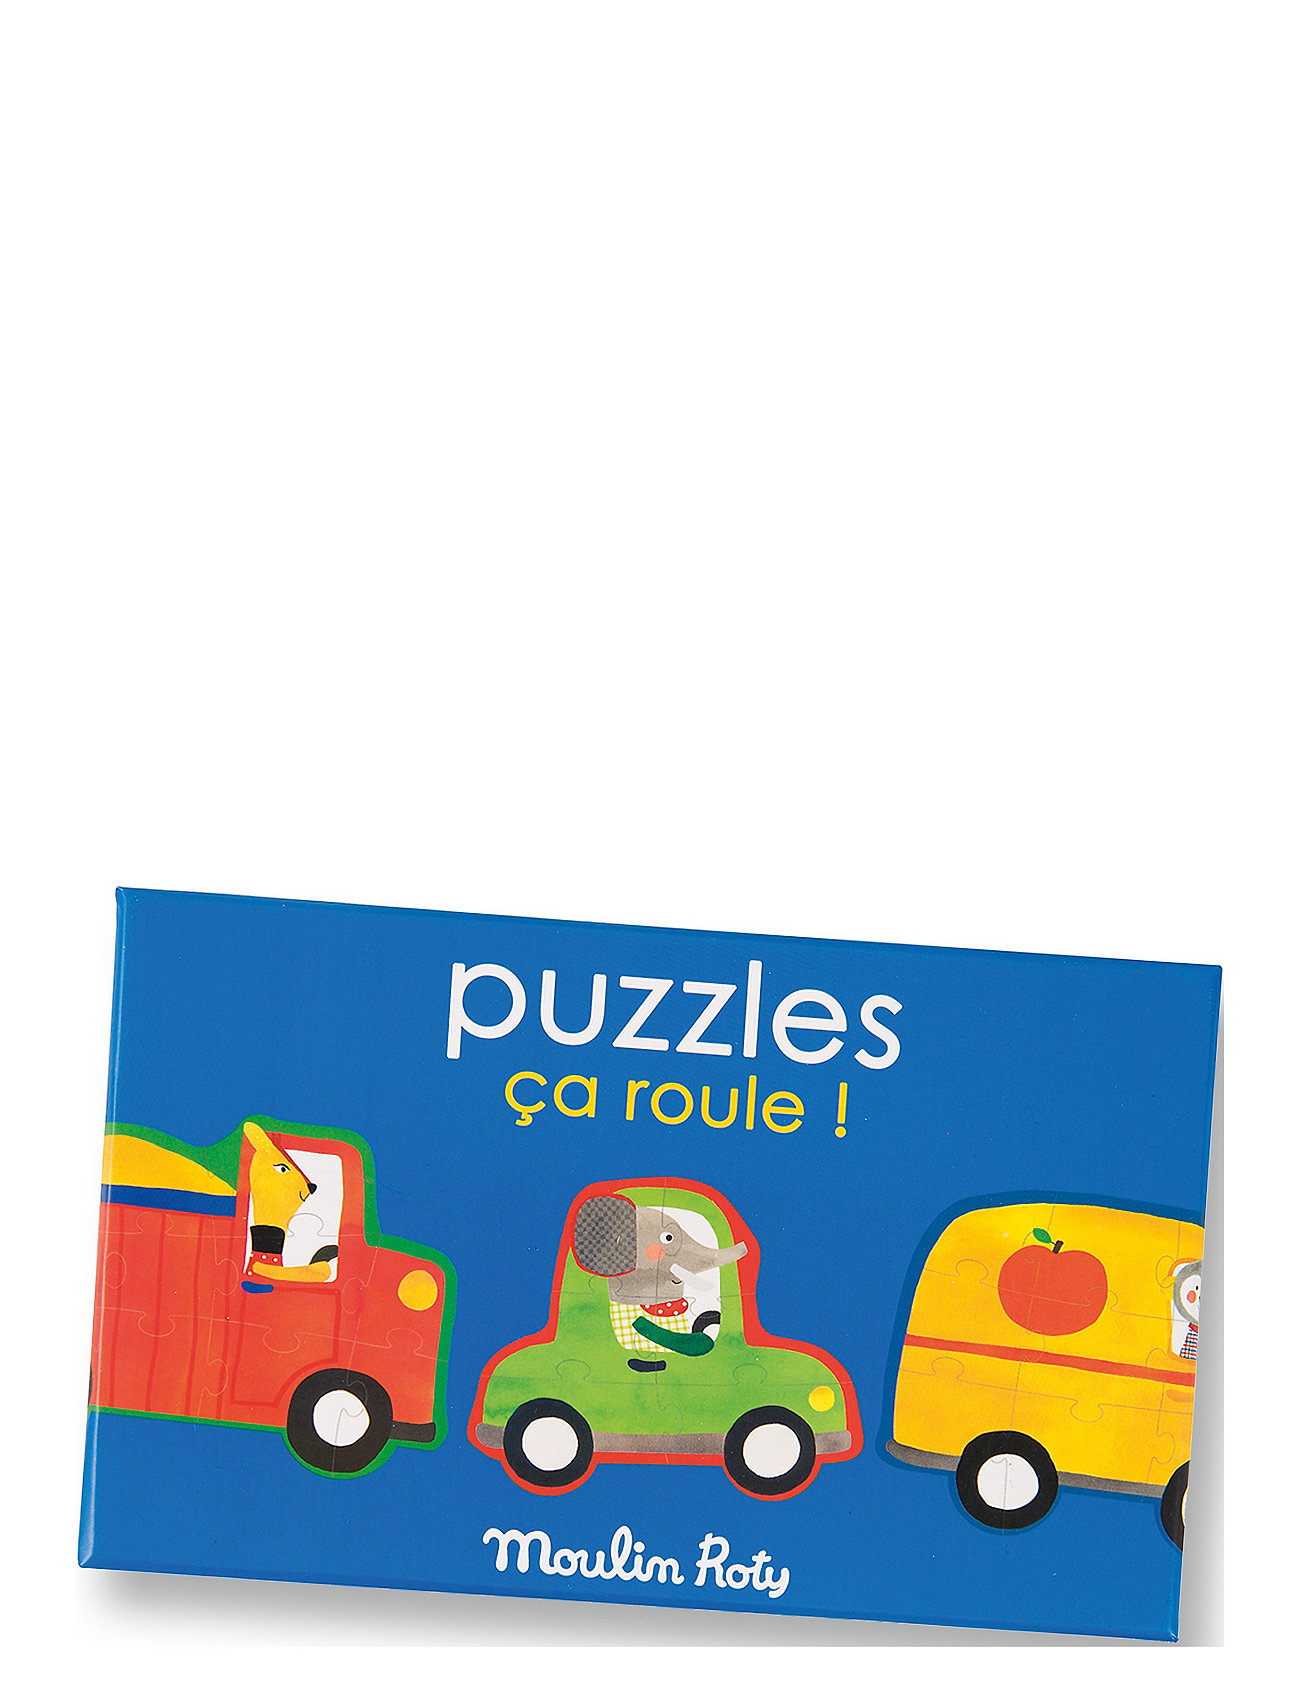 Puzzle Cars Popipop Toys Puzzles And Games Puzzles Classic Puzzles Multi/patterned Moulin Roty